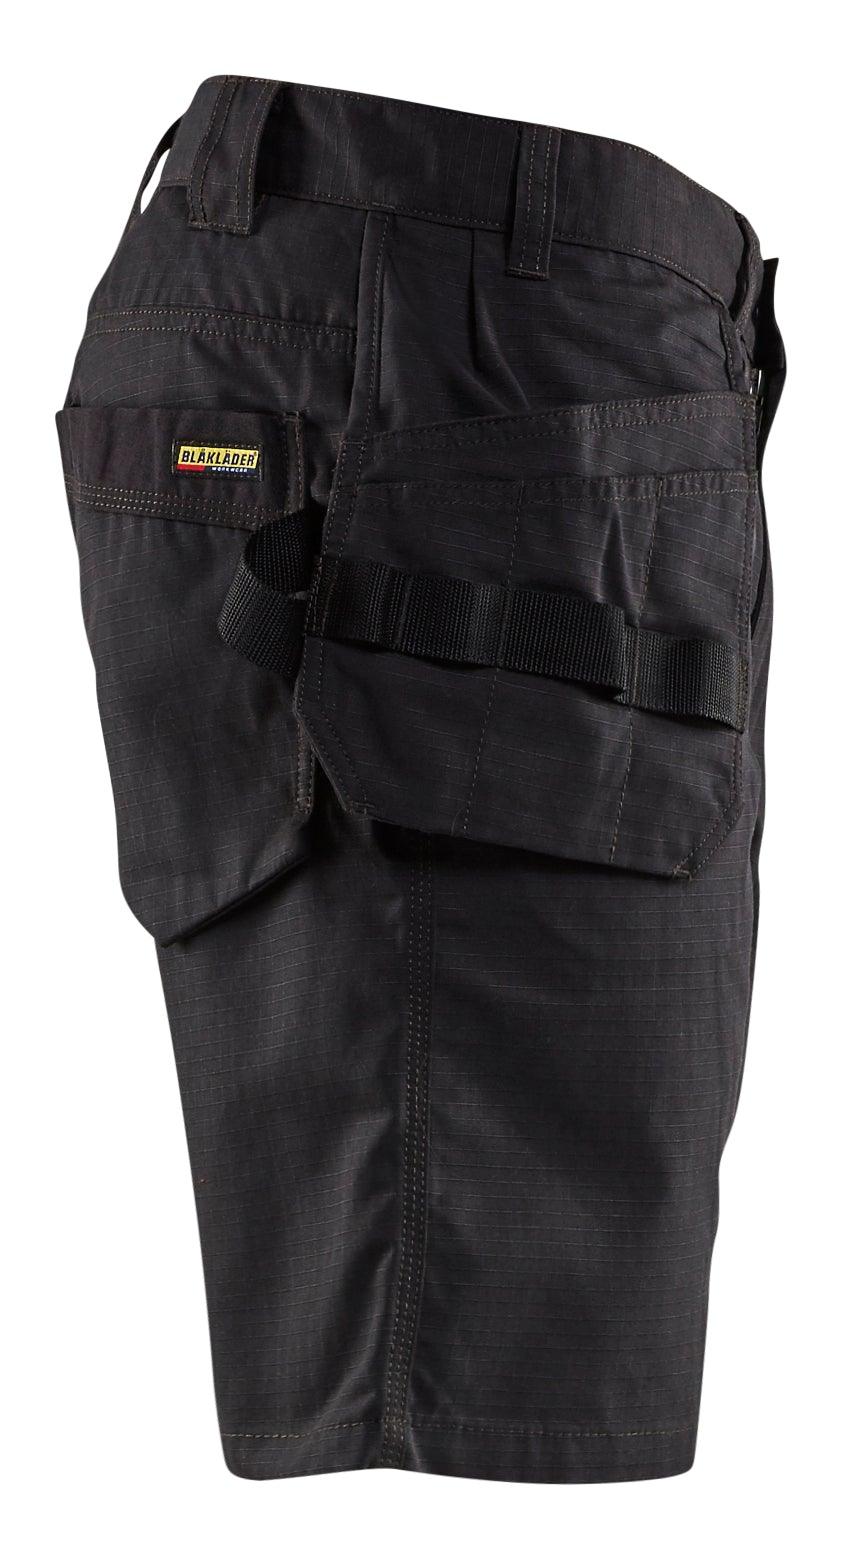 Blaklader 1637 7oz Rip Stop Shorts with Utility Pockets - Black - Trusted Gear Company LLC